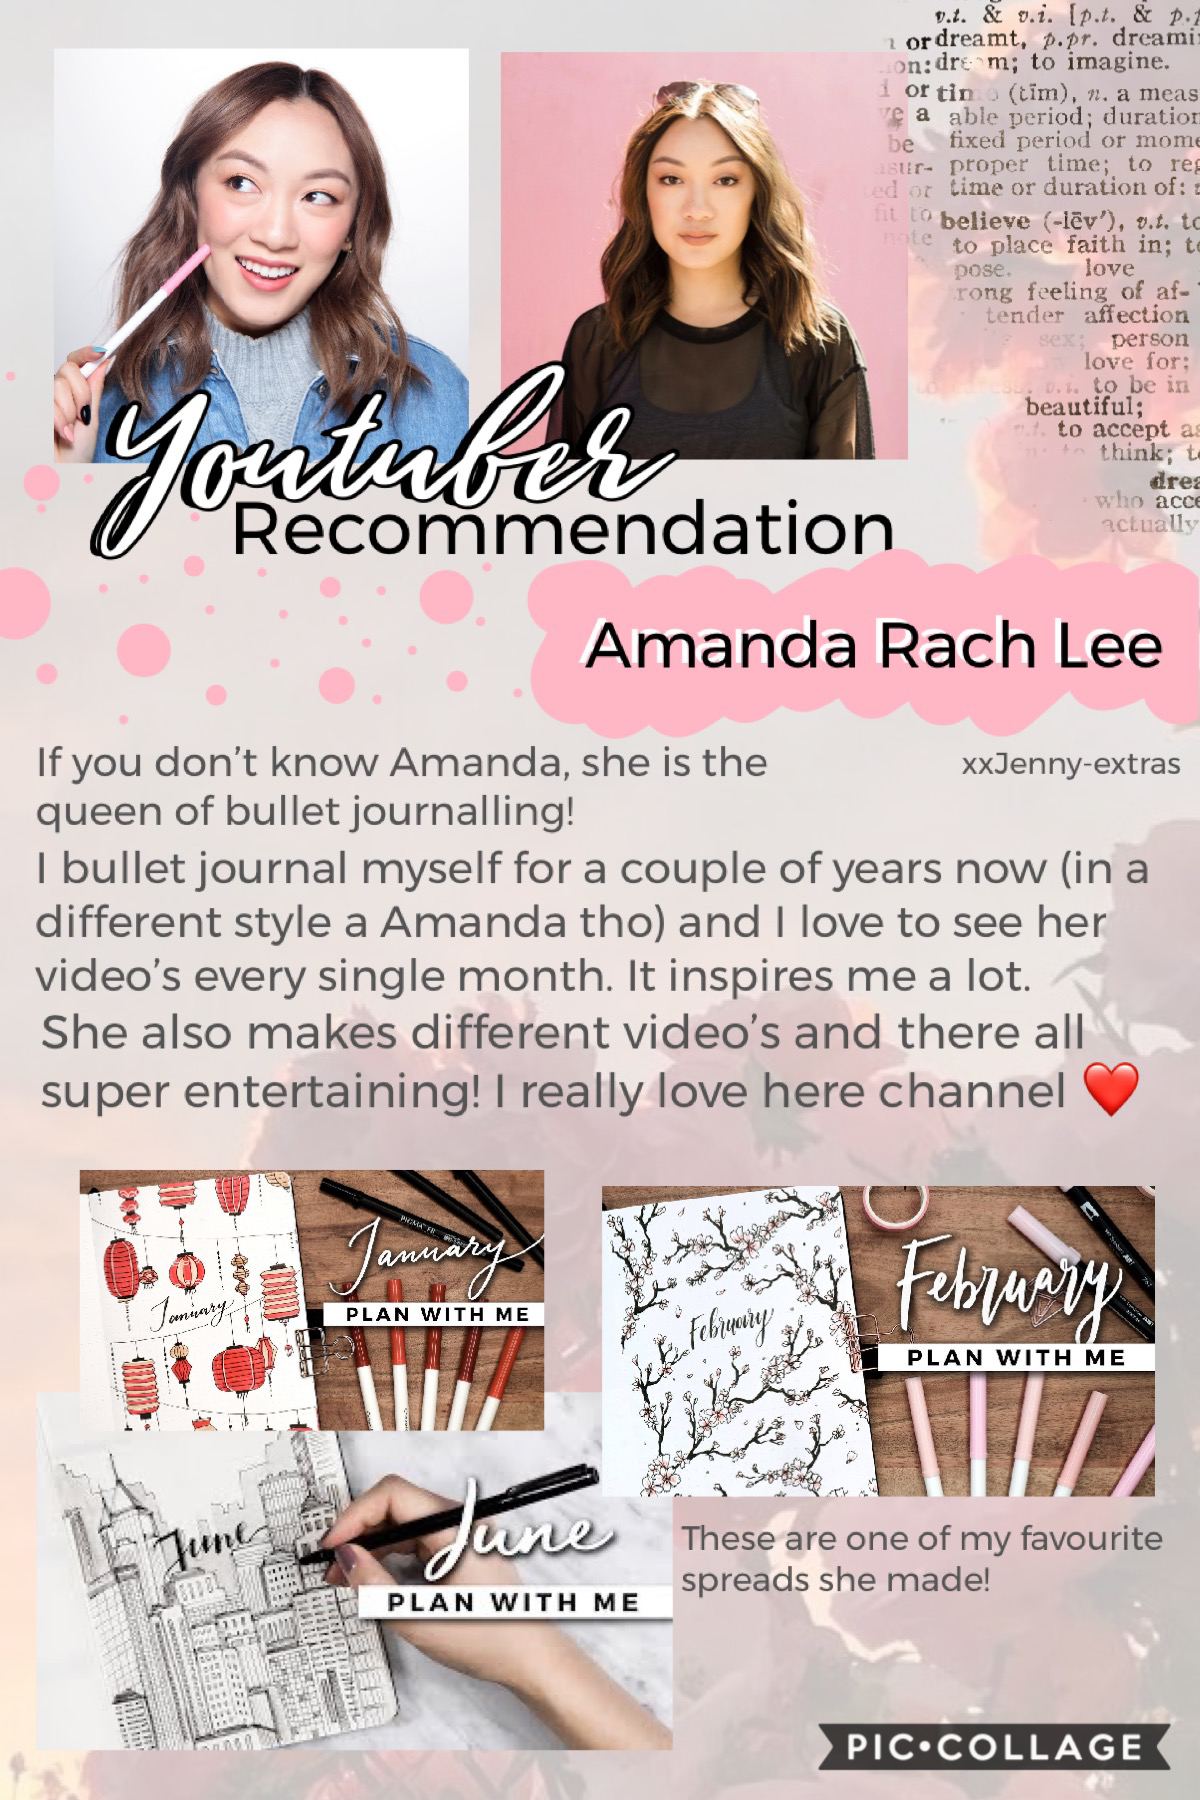 Youtuber recommendation #2 🌸✨
[06/04/2020]